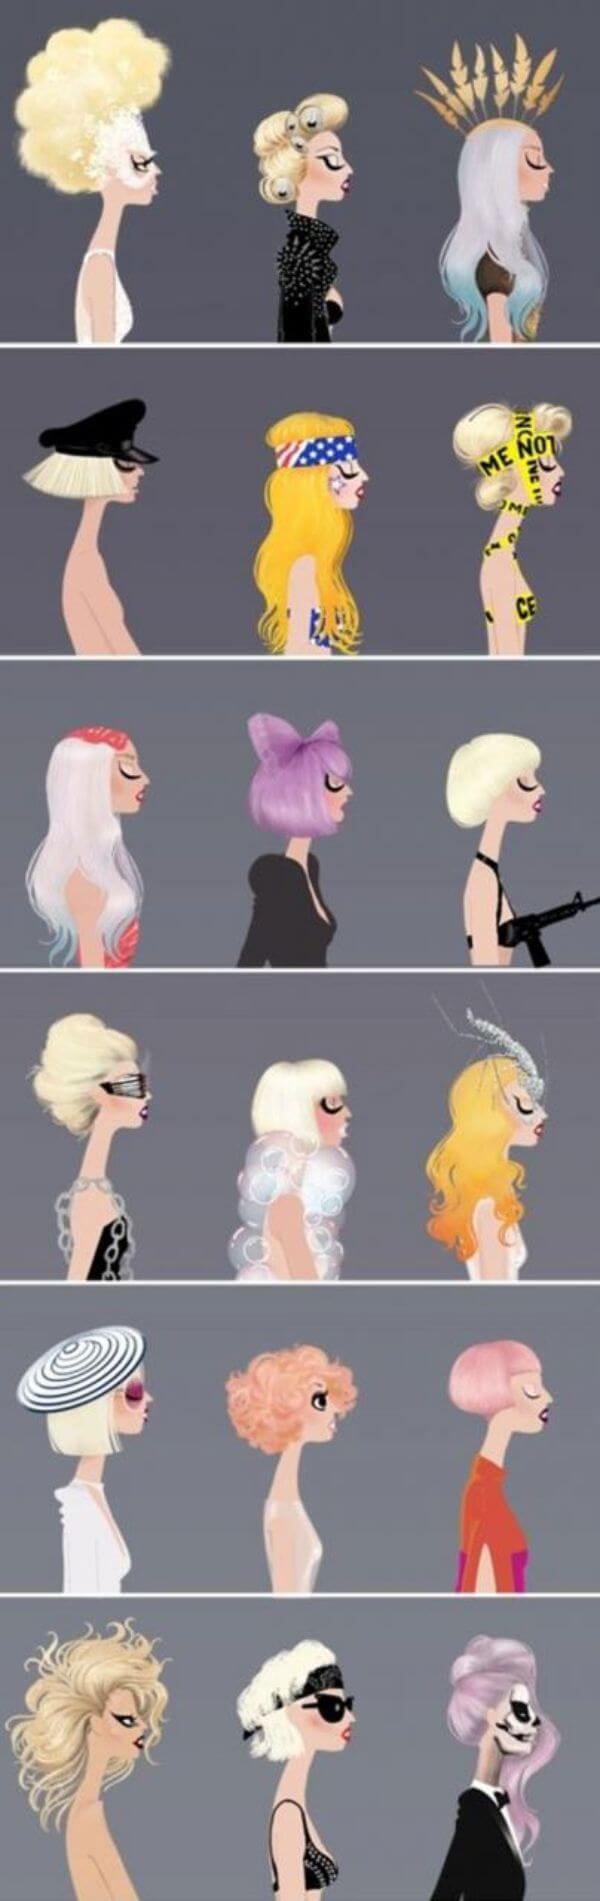 Lady Gaga outfit series by illustrator Adrian Valencia